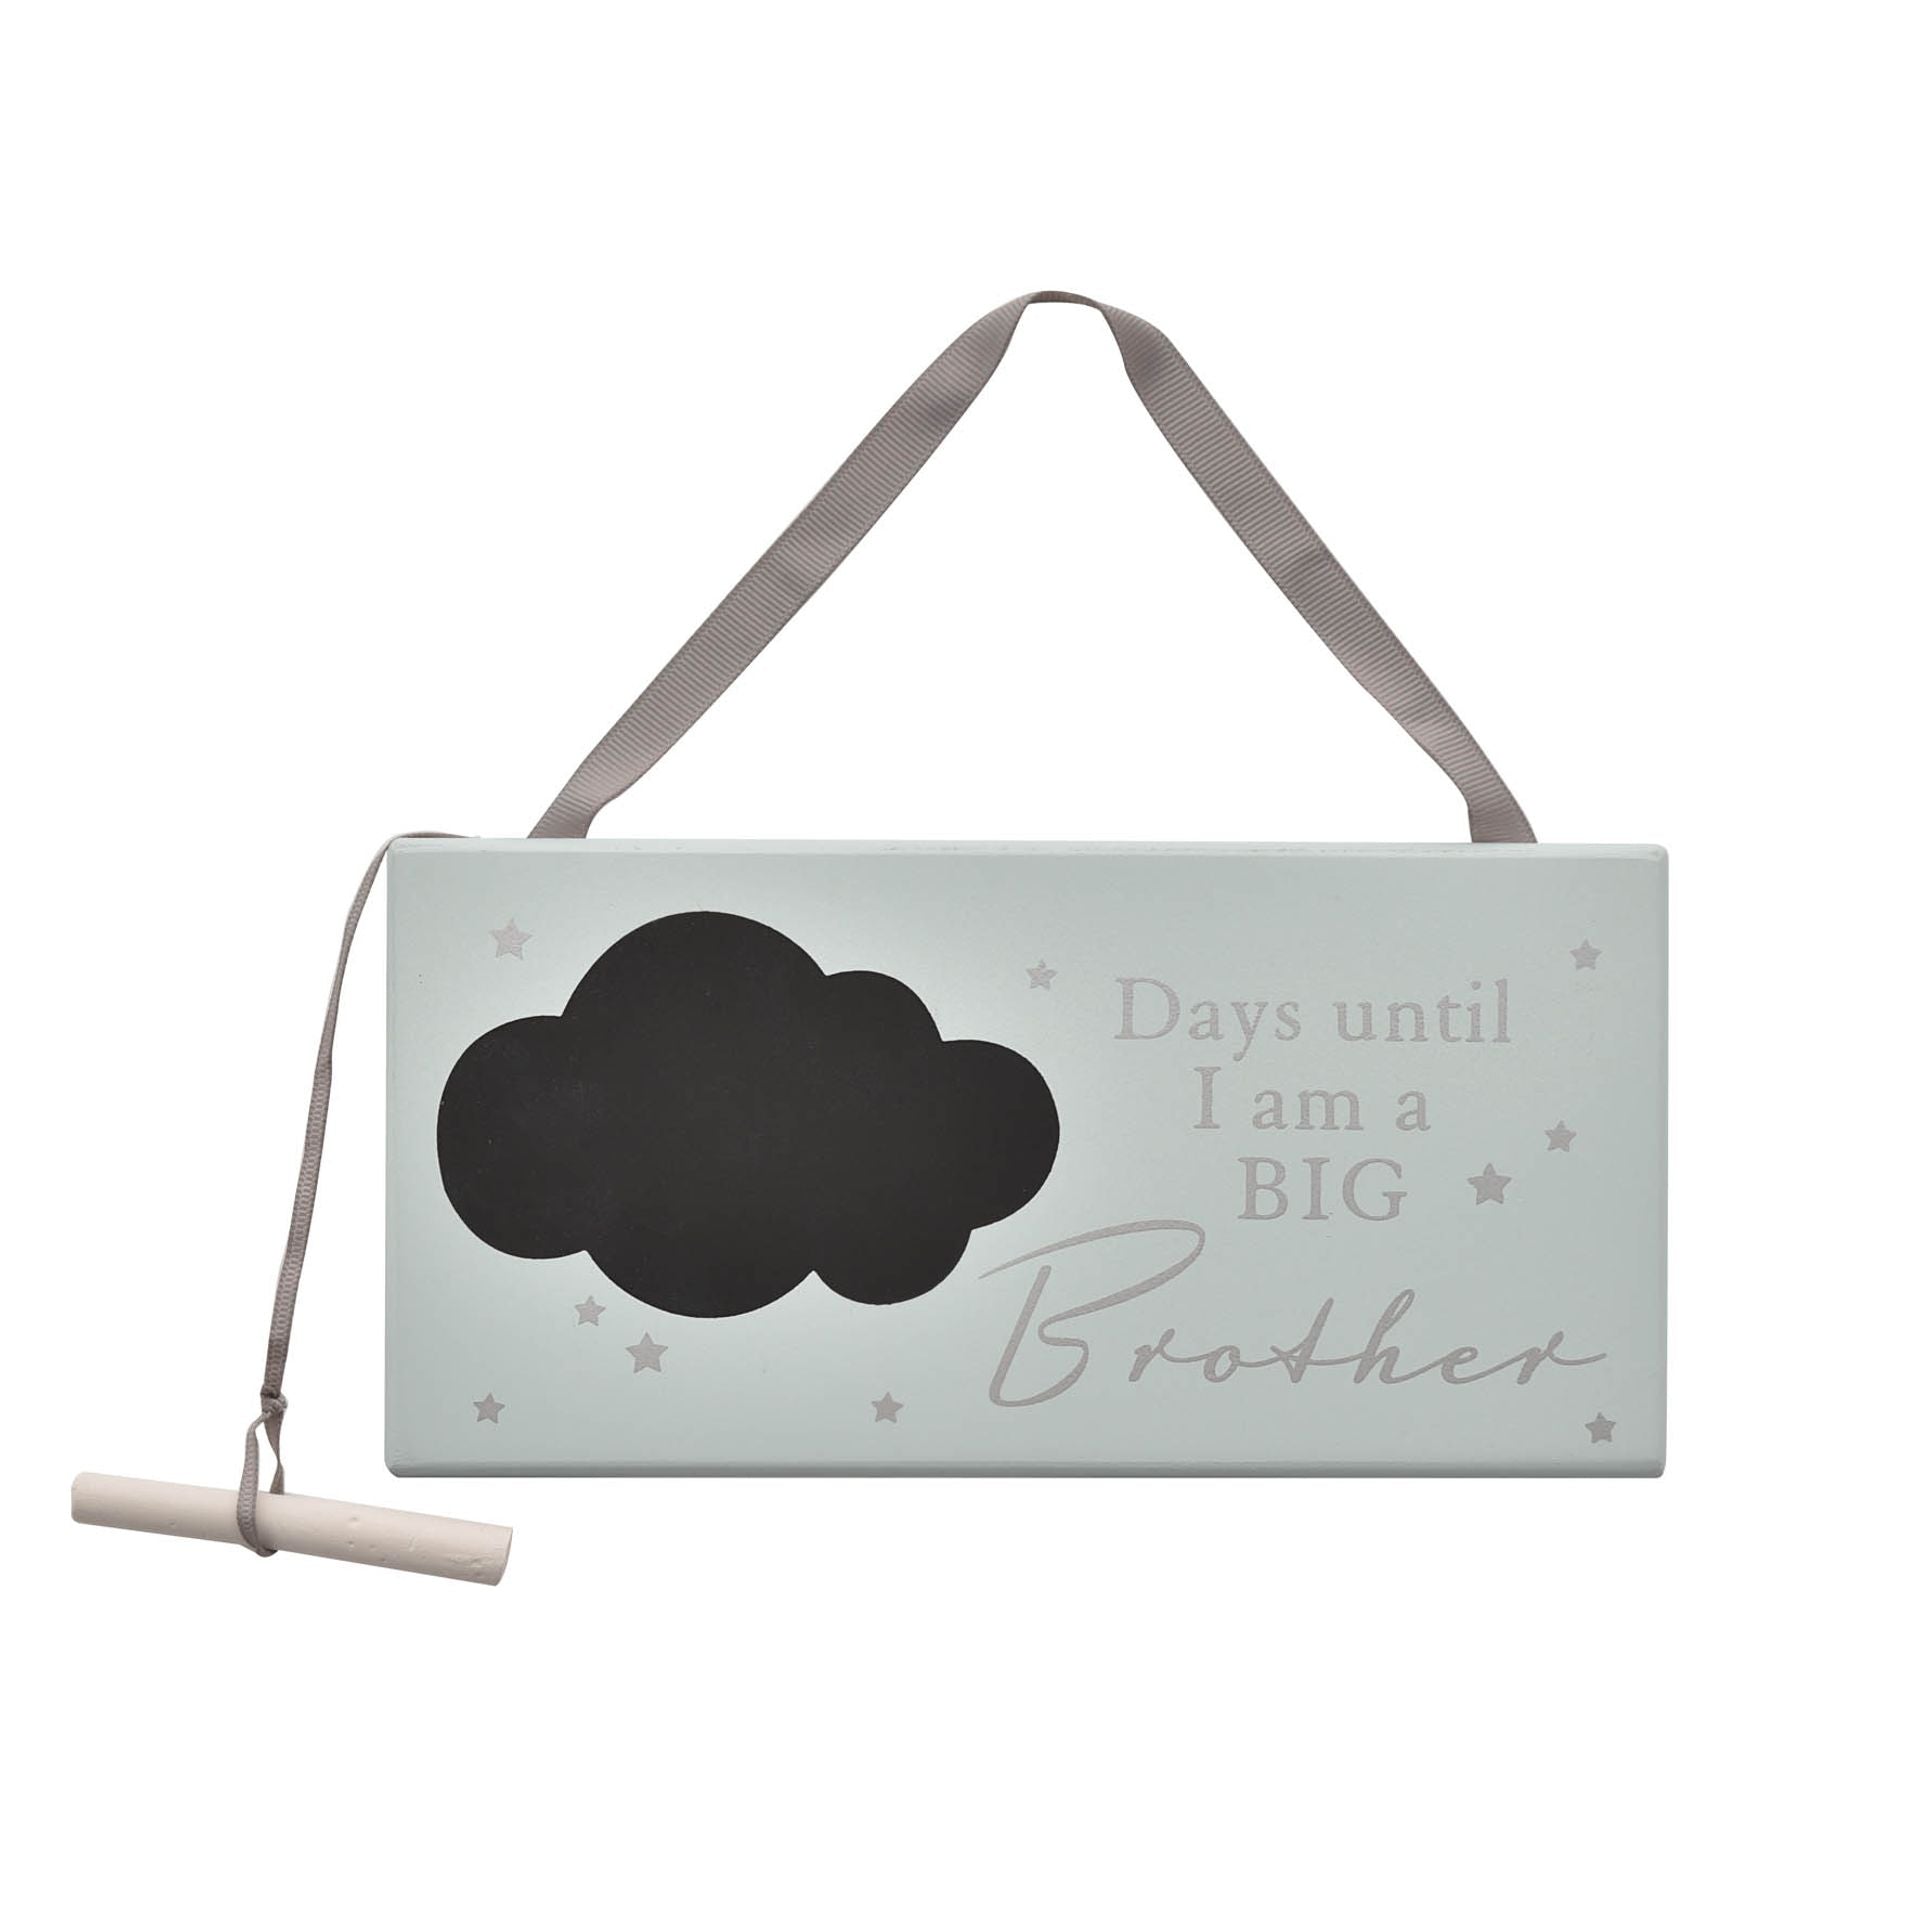 A chalk count down plaque with 'Days Until I Am A Big Brother' written on it